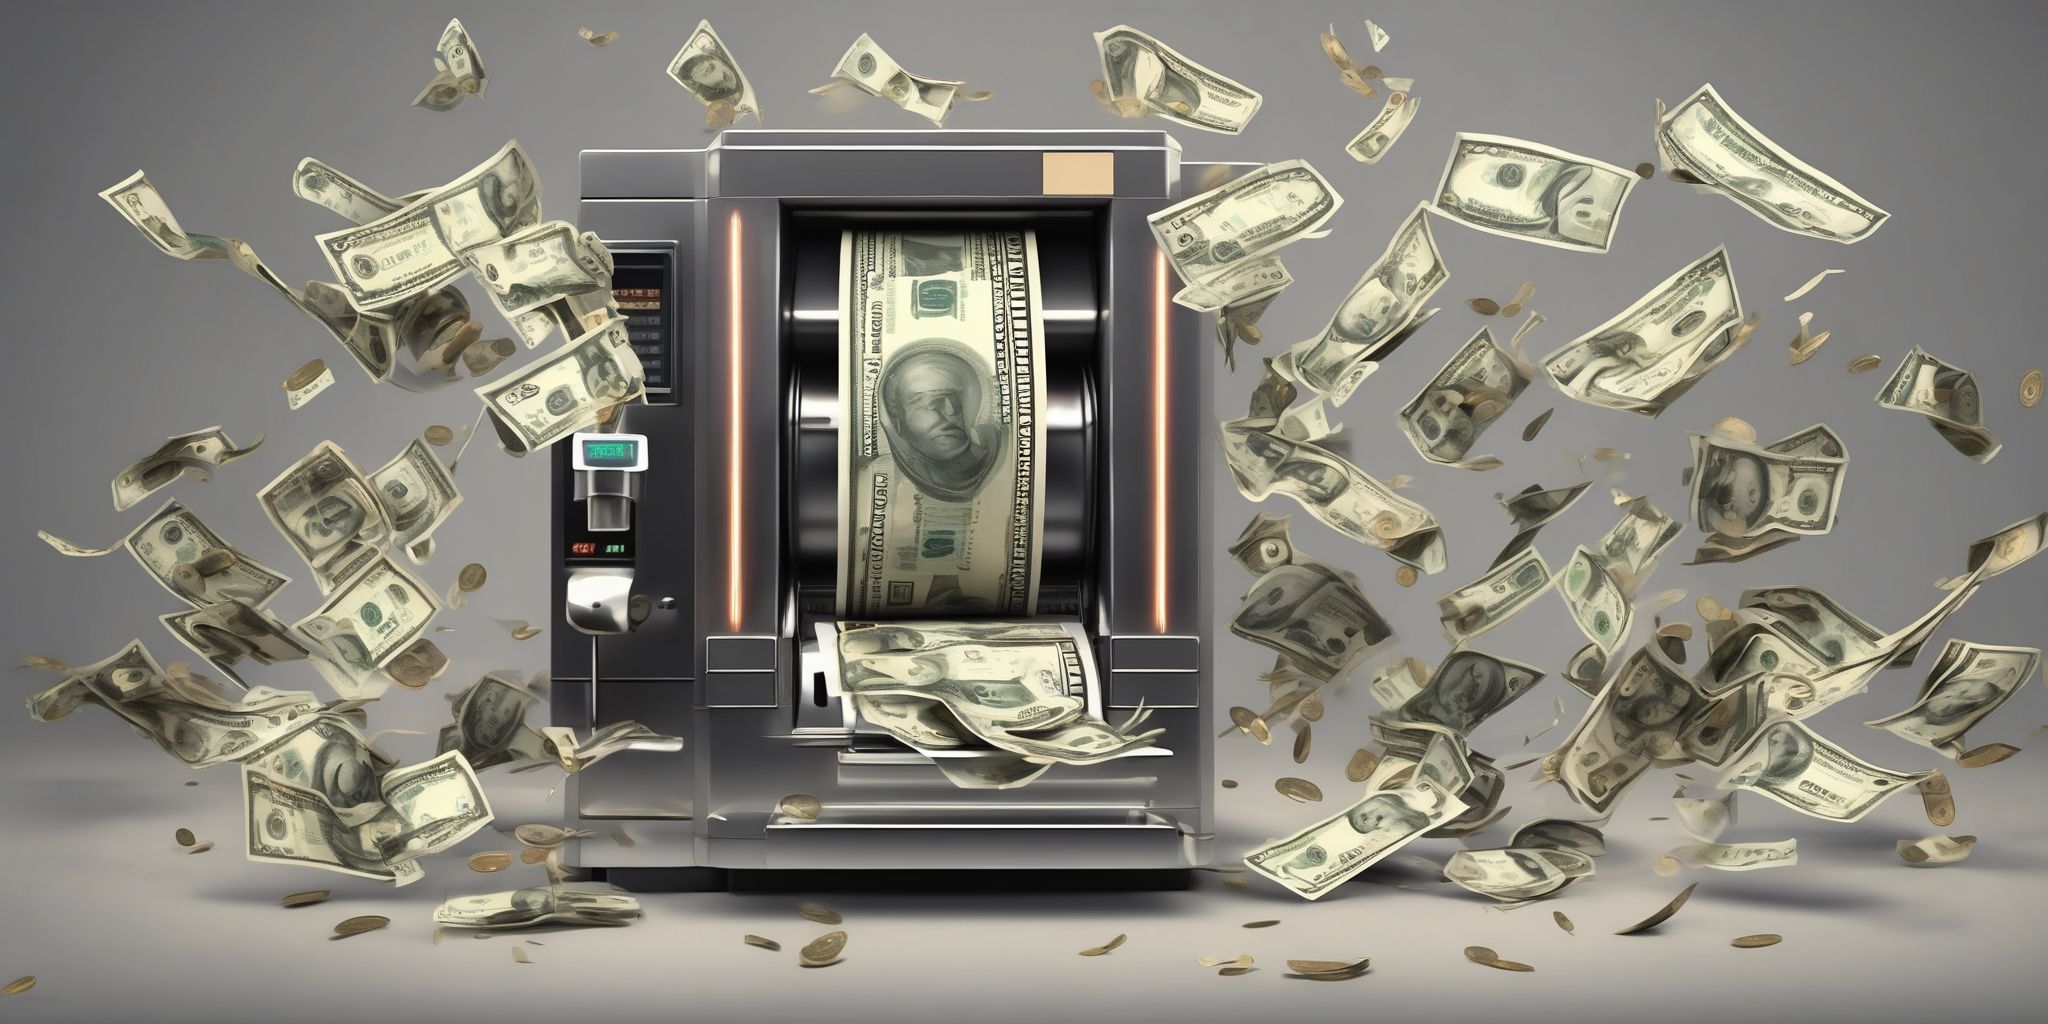 Money machine  in realistic, photographic style